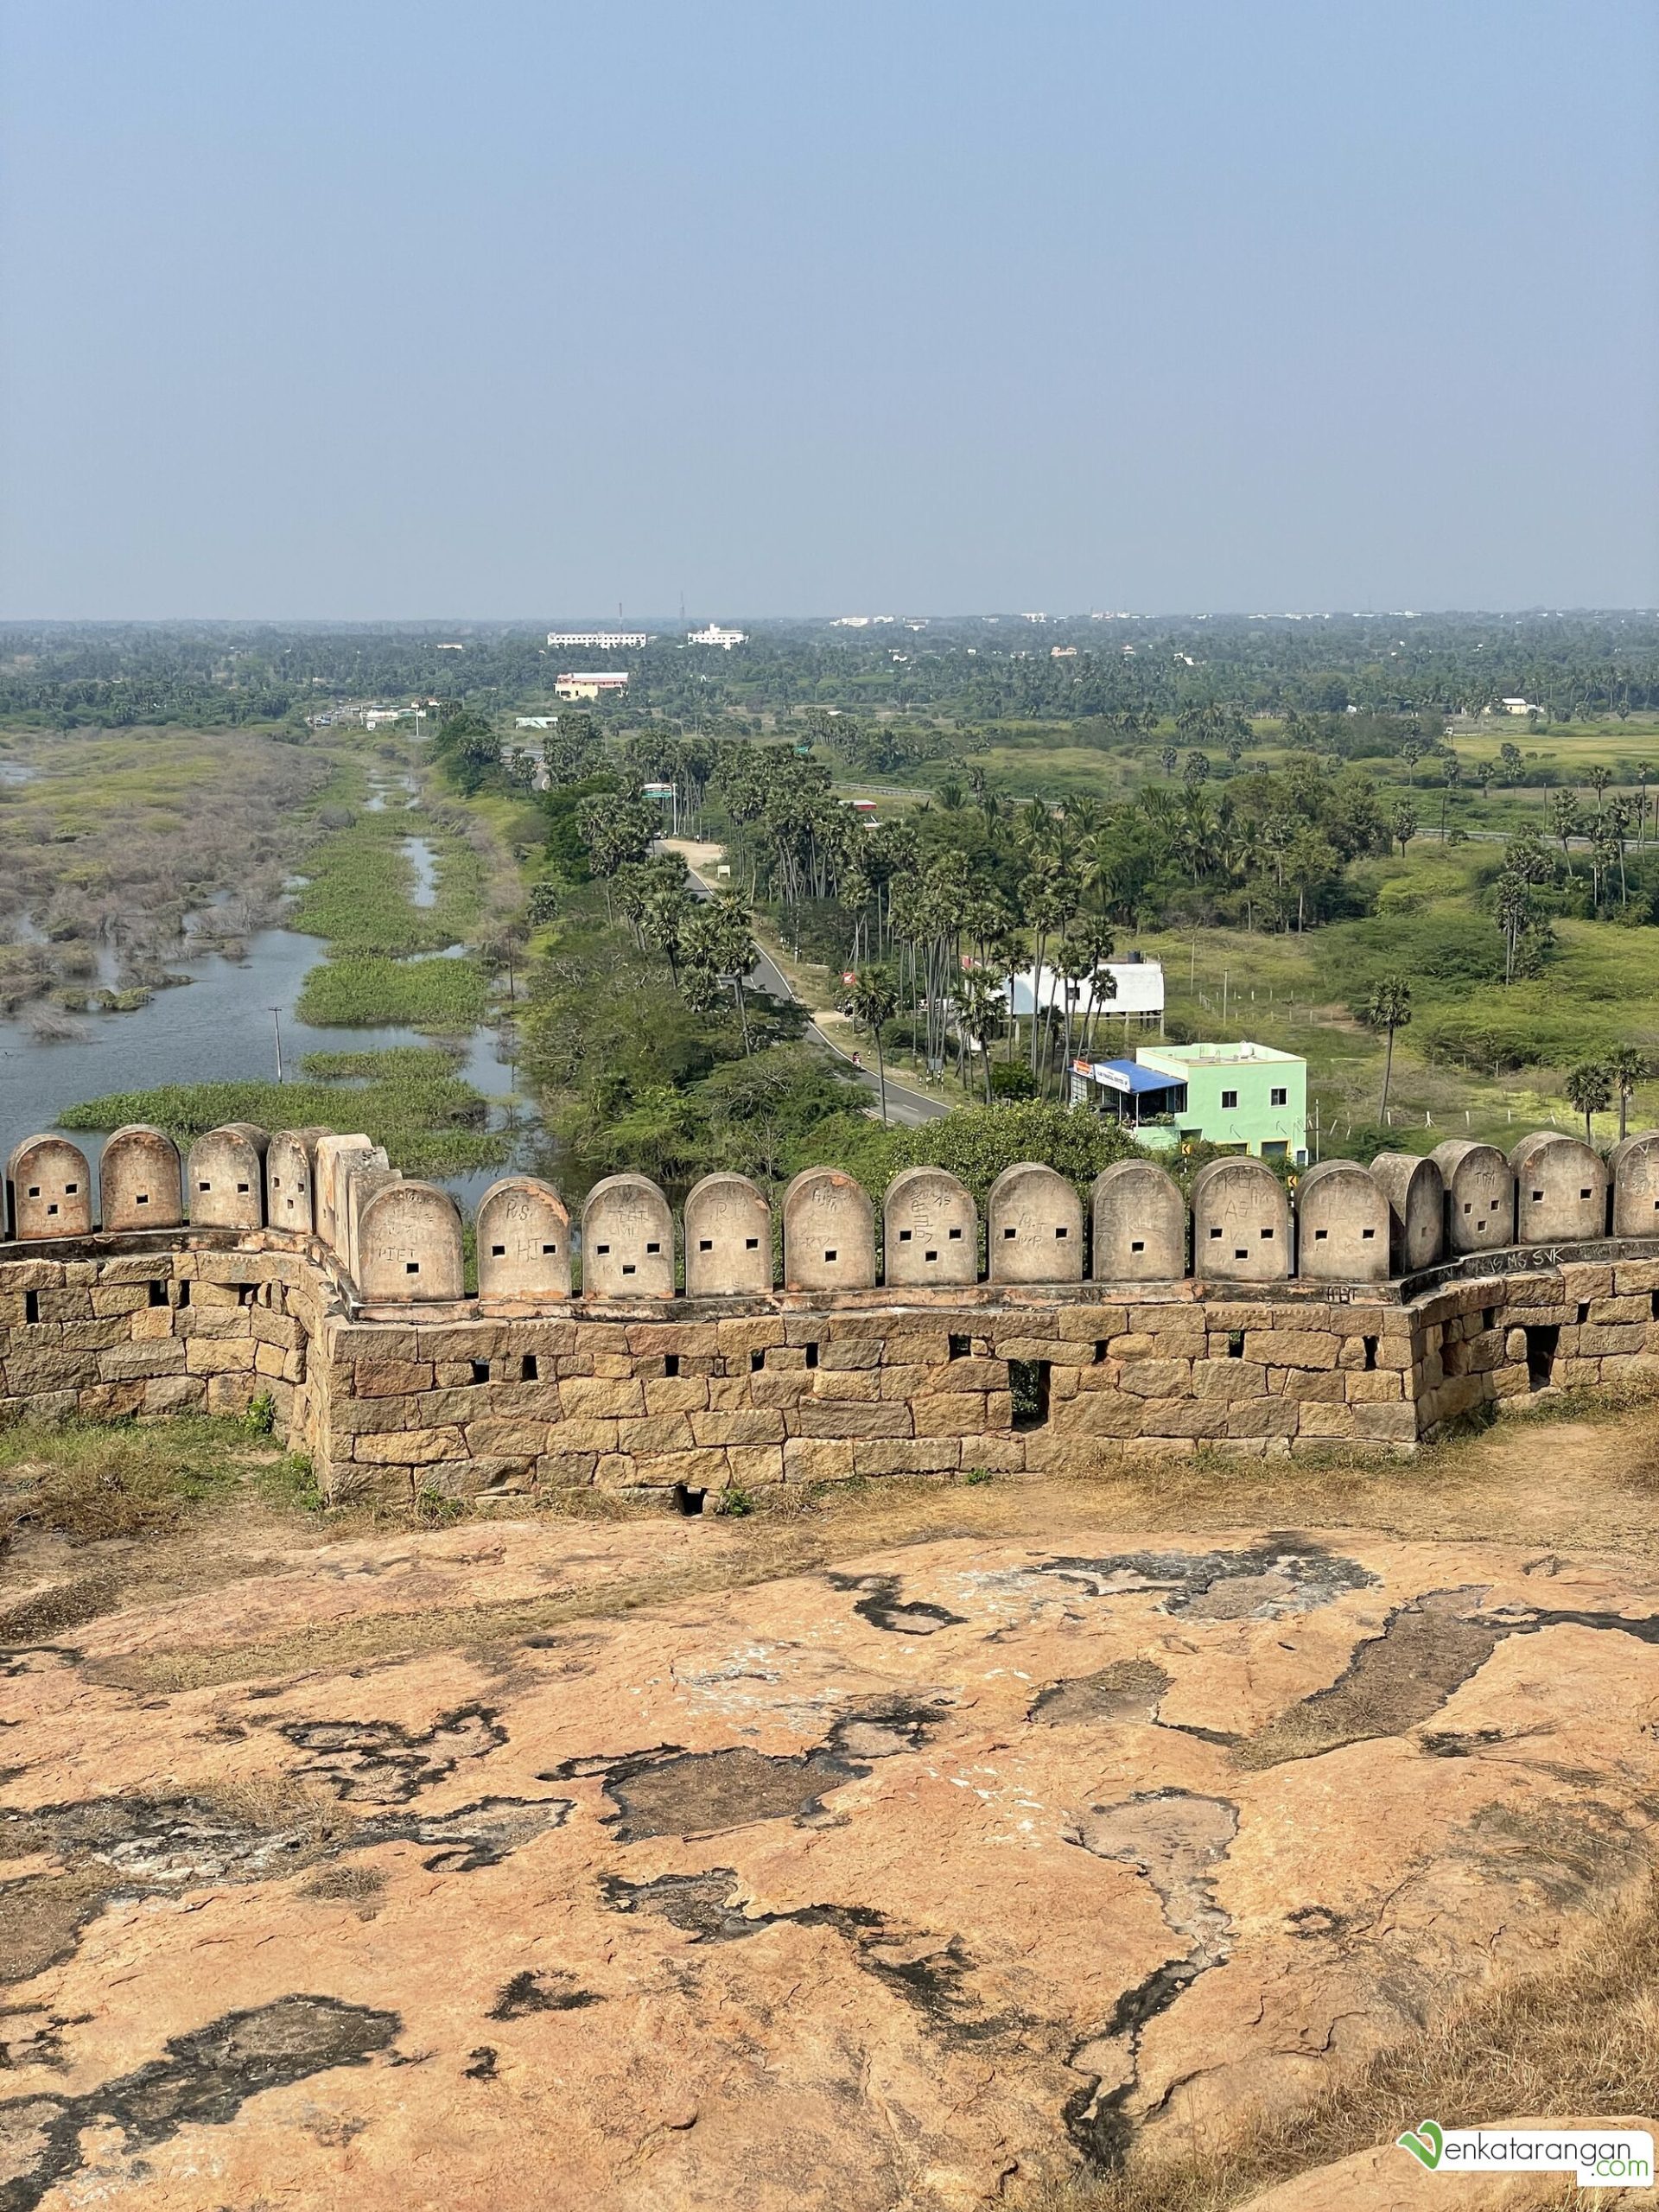 View of the town below from the top of the Thirumayam fort 